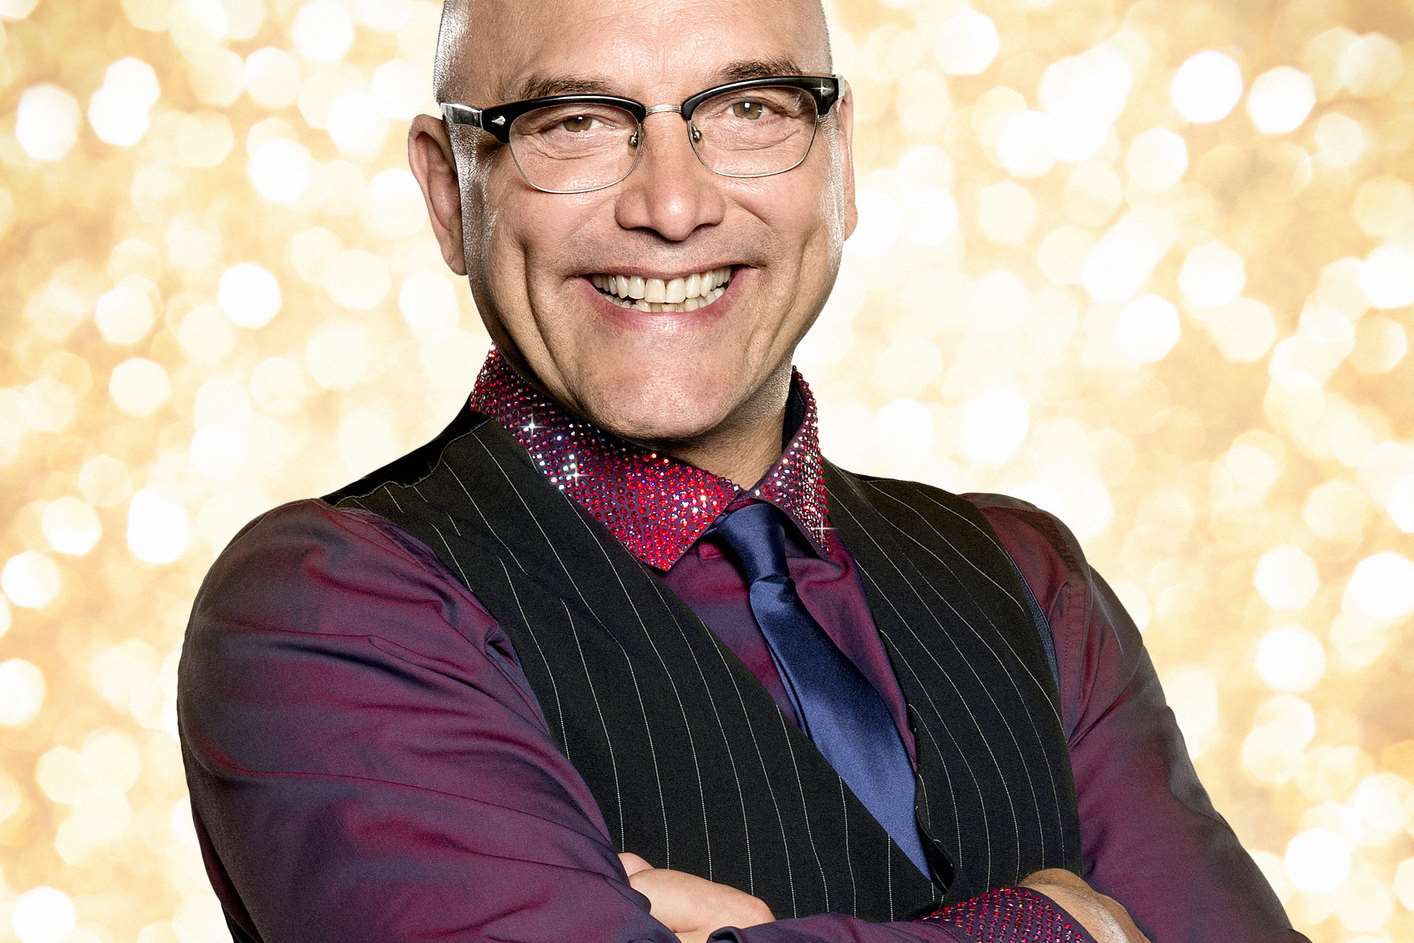 Whitstable-based chef Gregg Wallace is appearing on Strictly Come Dancing. Picture: BBC/RayBurmiston